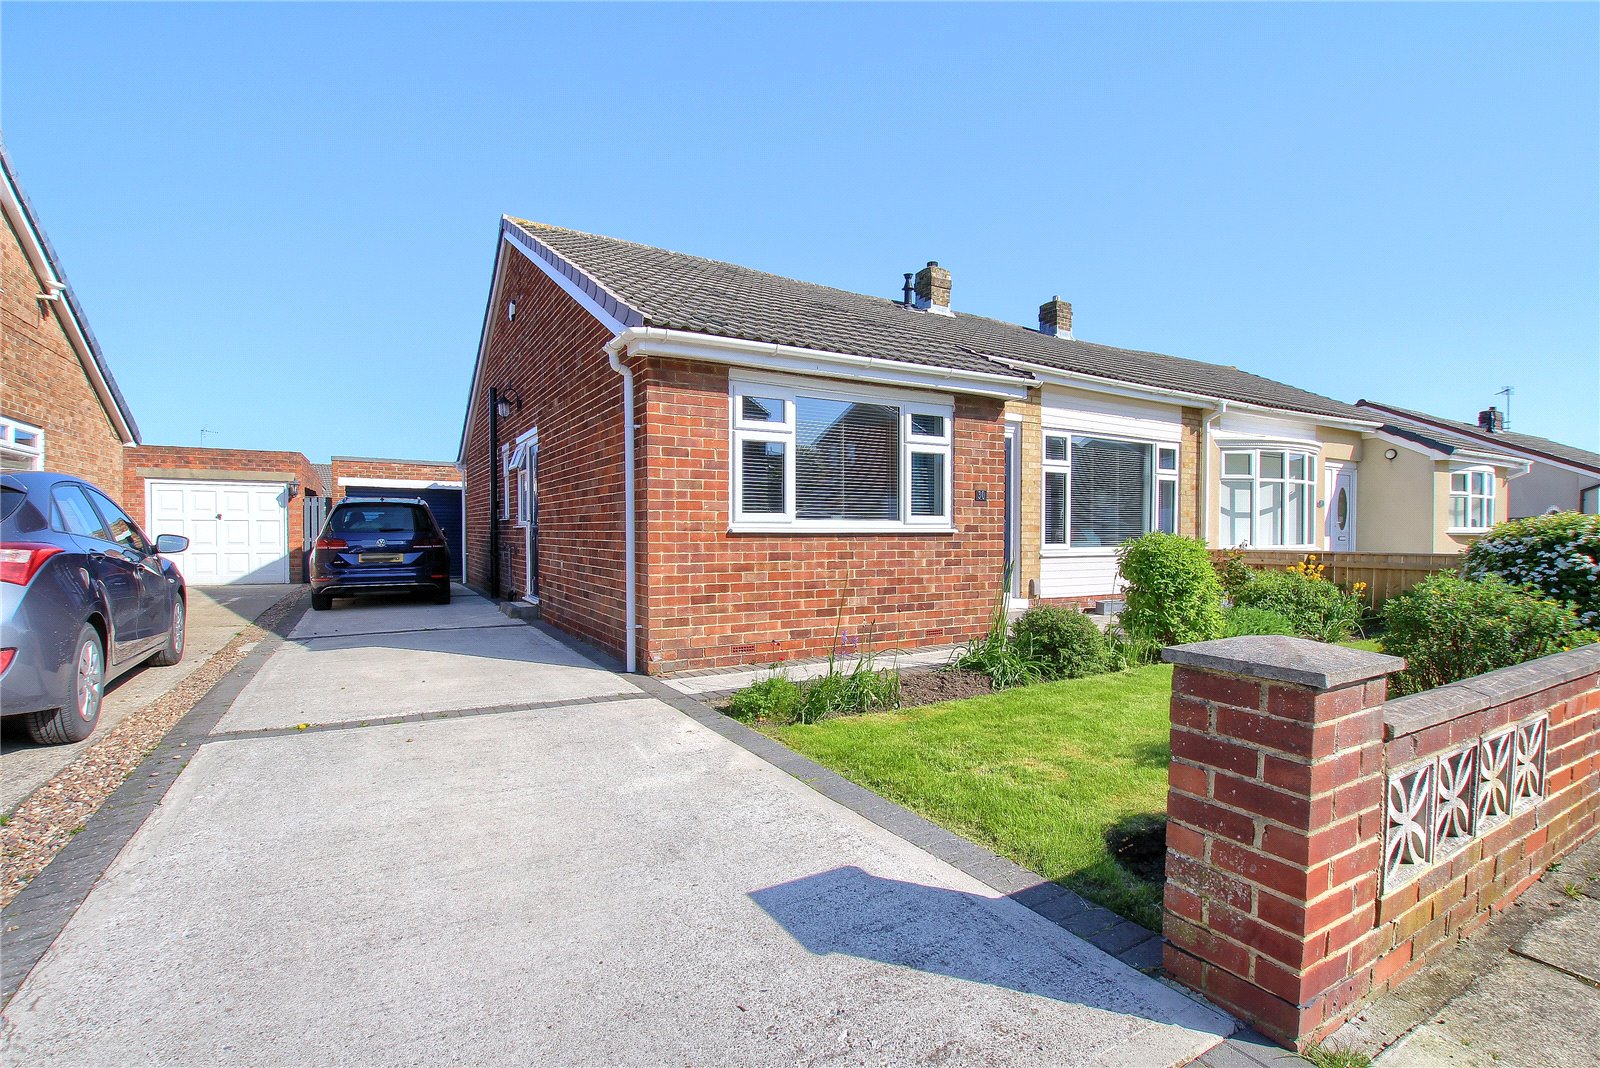 3 bed bungalow for sale in Wolviston Court, Billingham - Property Image 1